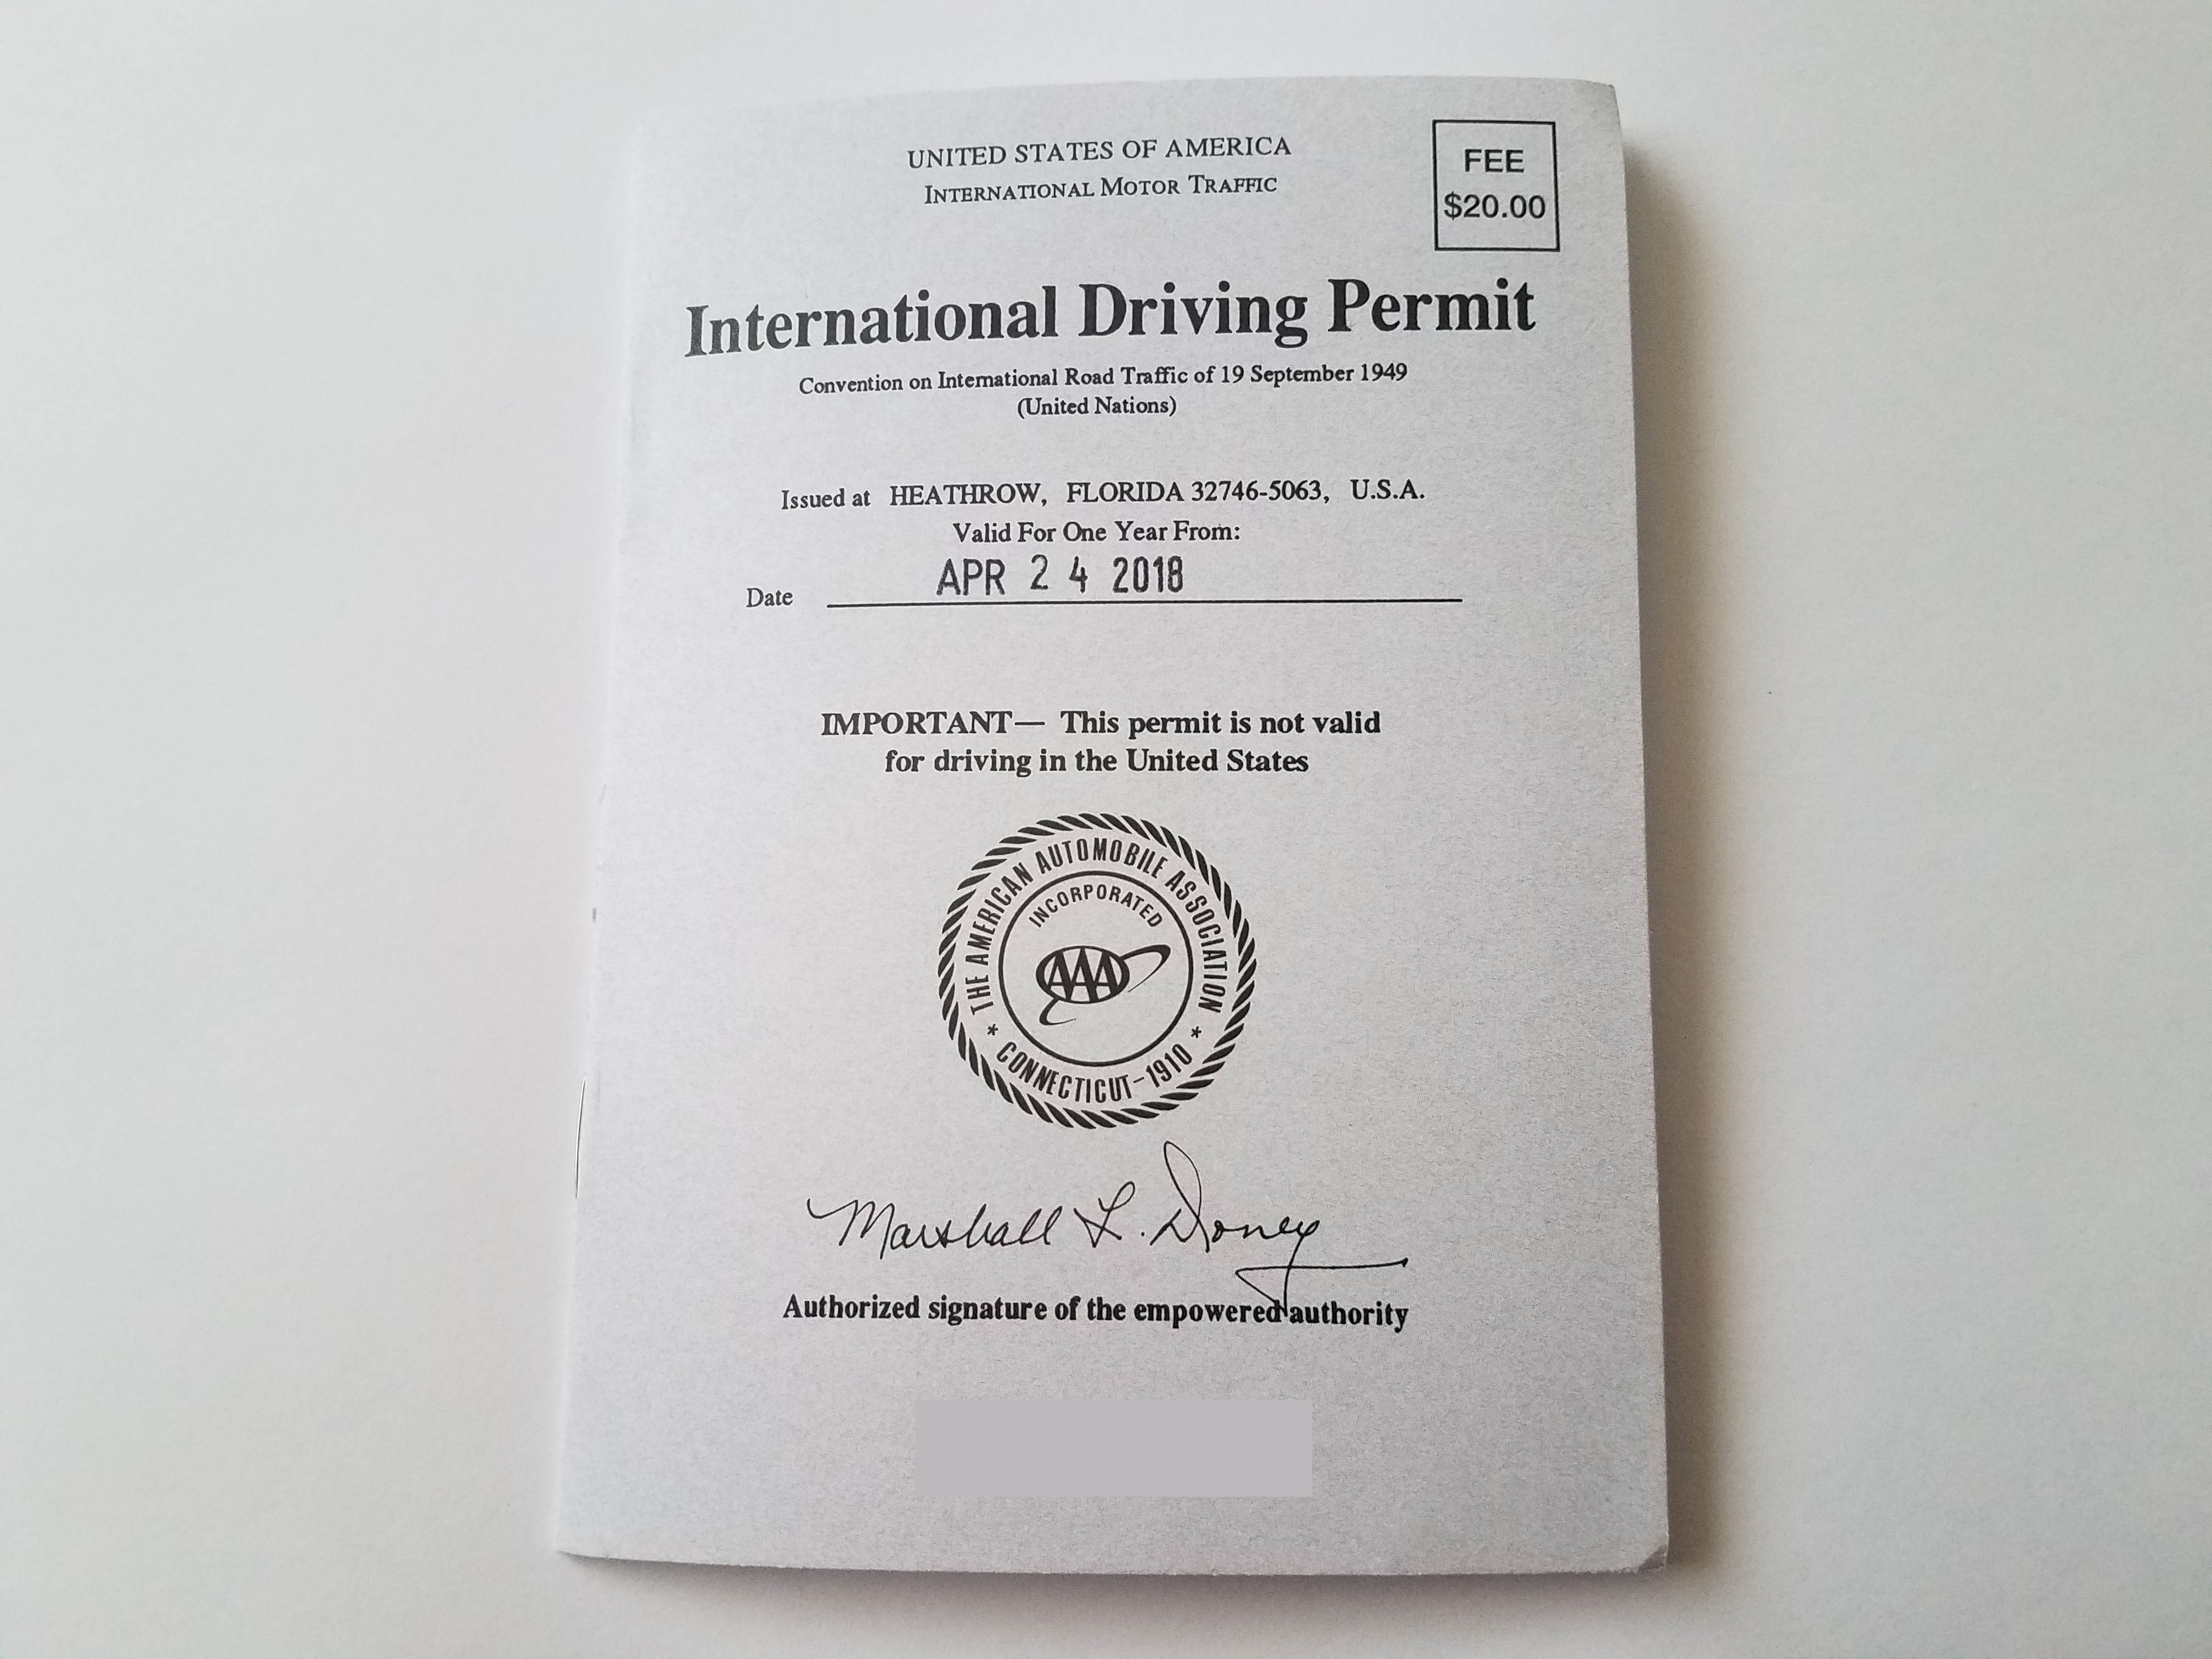 How To Apply For An International Driving Permit